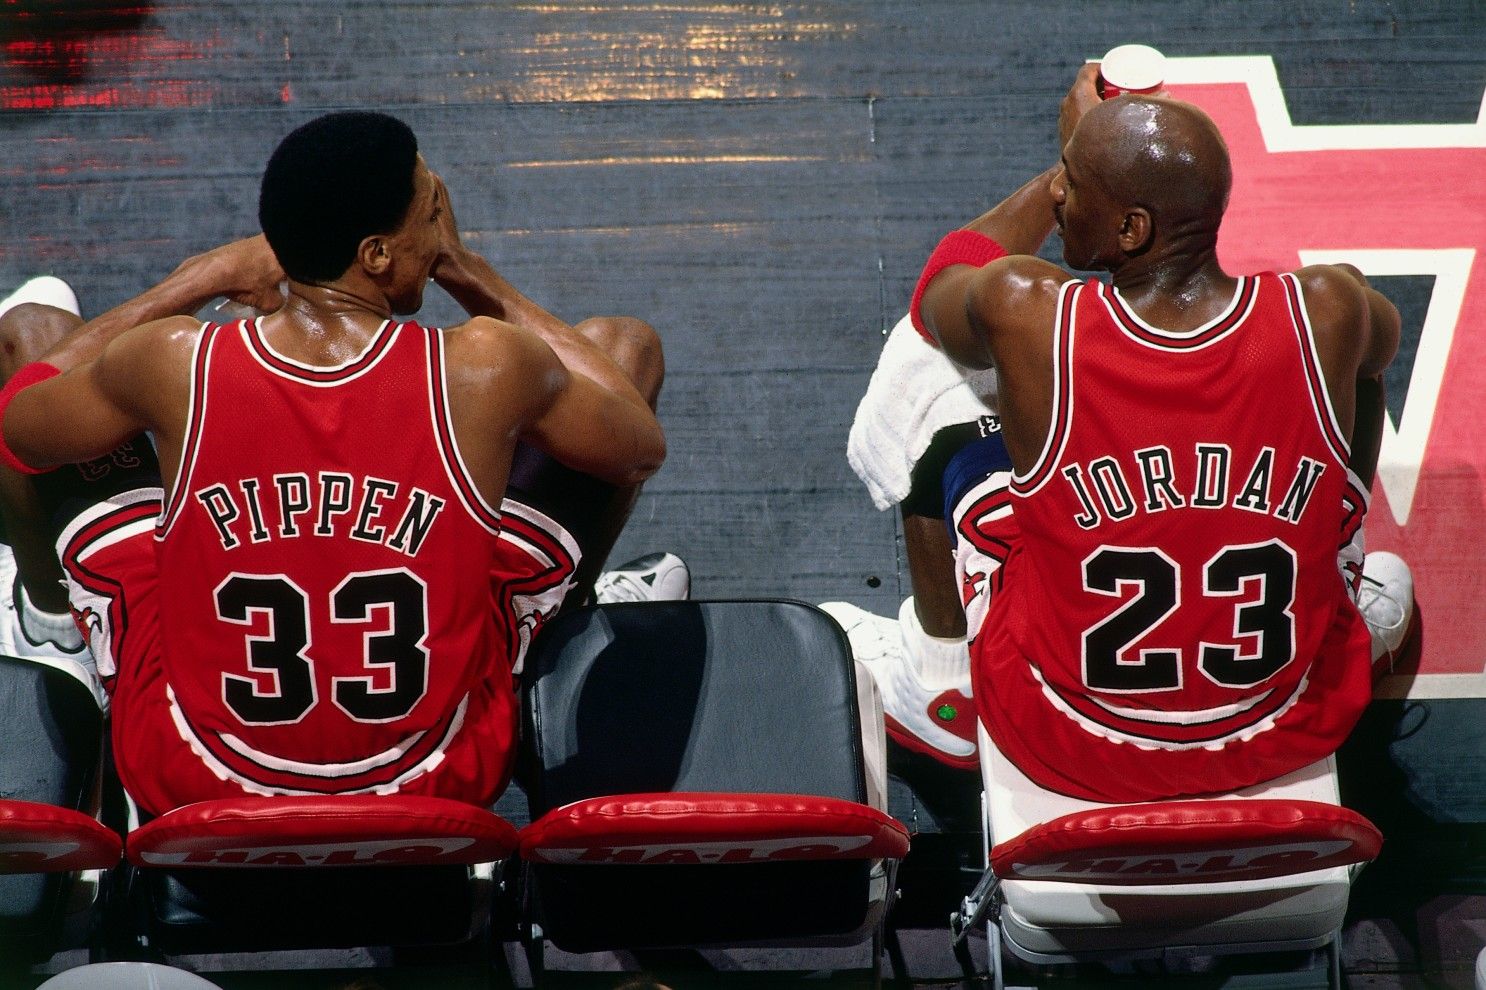 The Last Dance' ESPN: How they got the classic Jordan footage Angeles Times